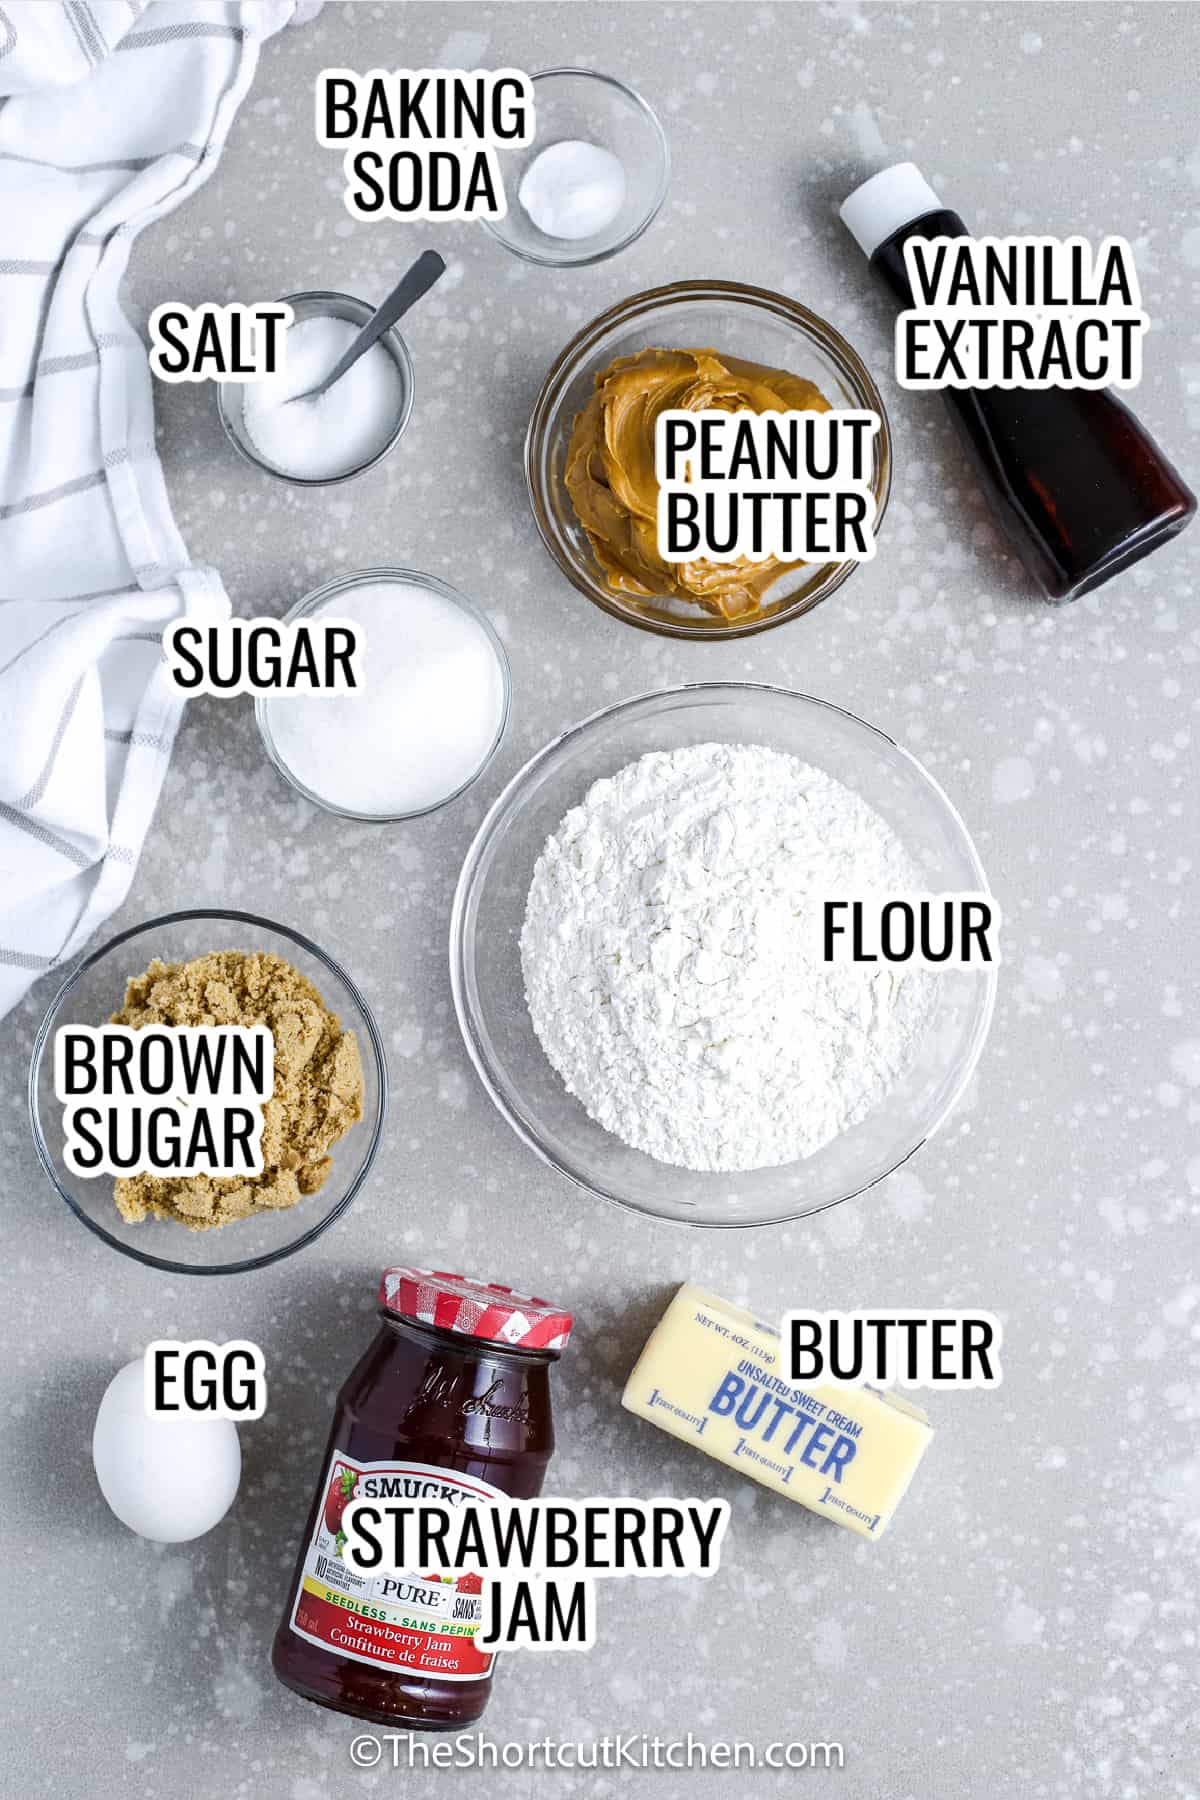 ingredients assembled to make peanut butter and jelly bars including sugar, flour, peanut butter, jam, egg, butter, baking soda, and salt